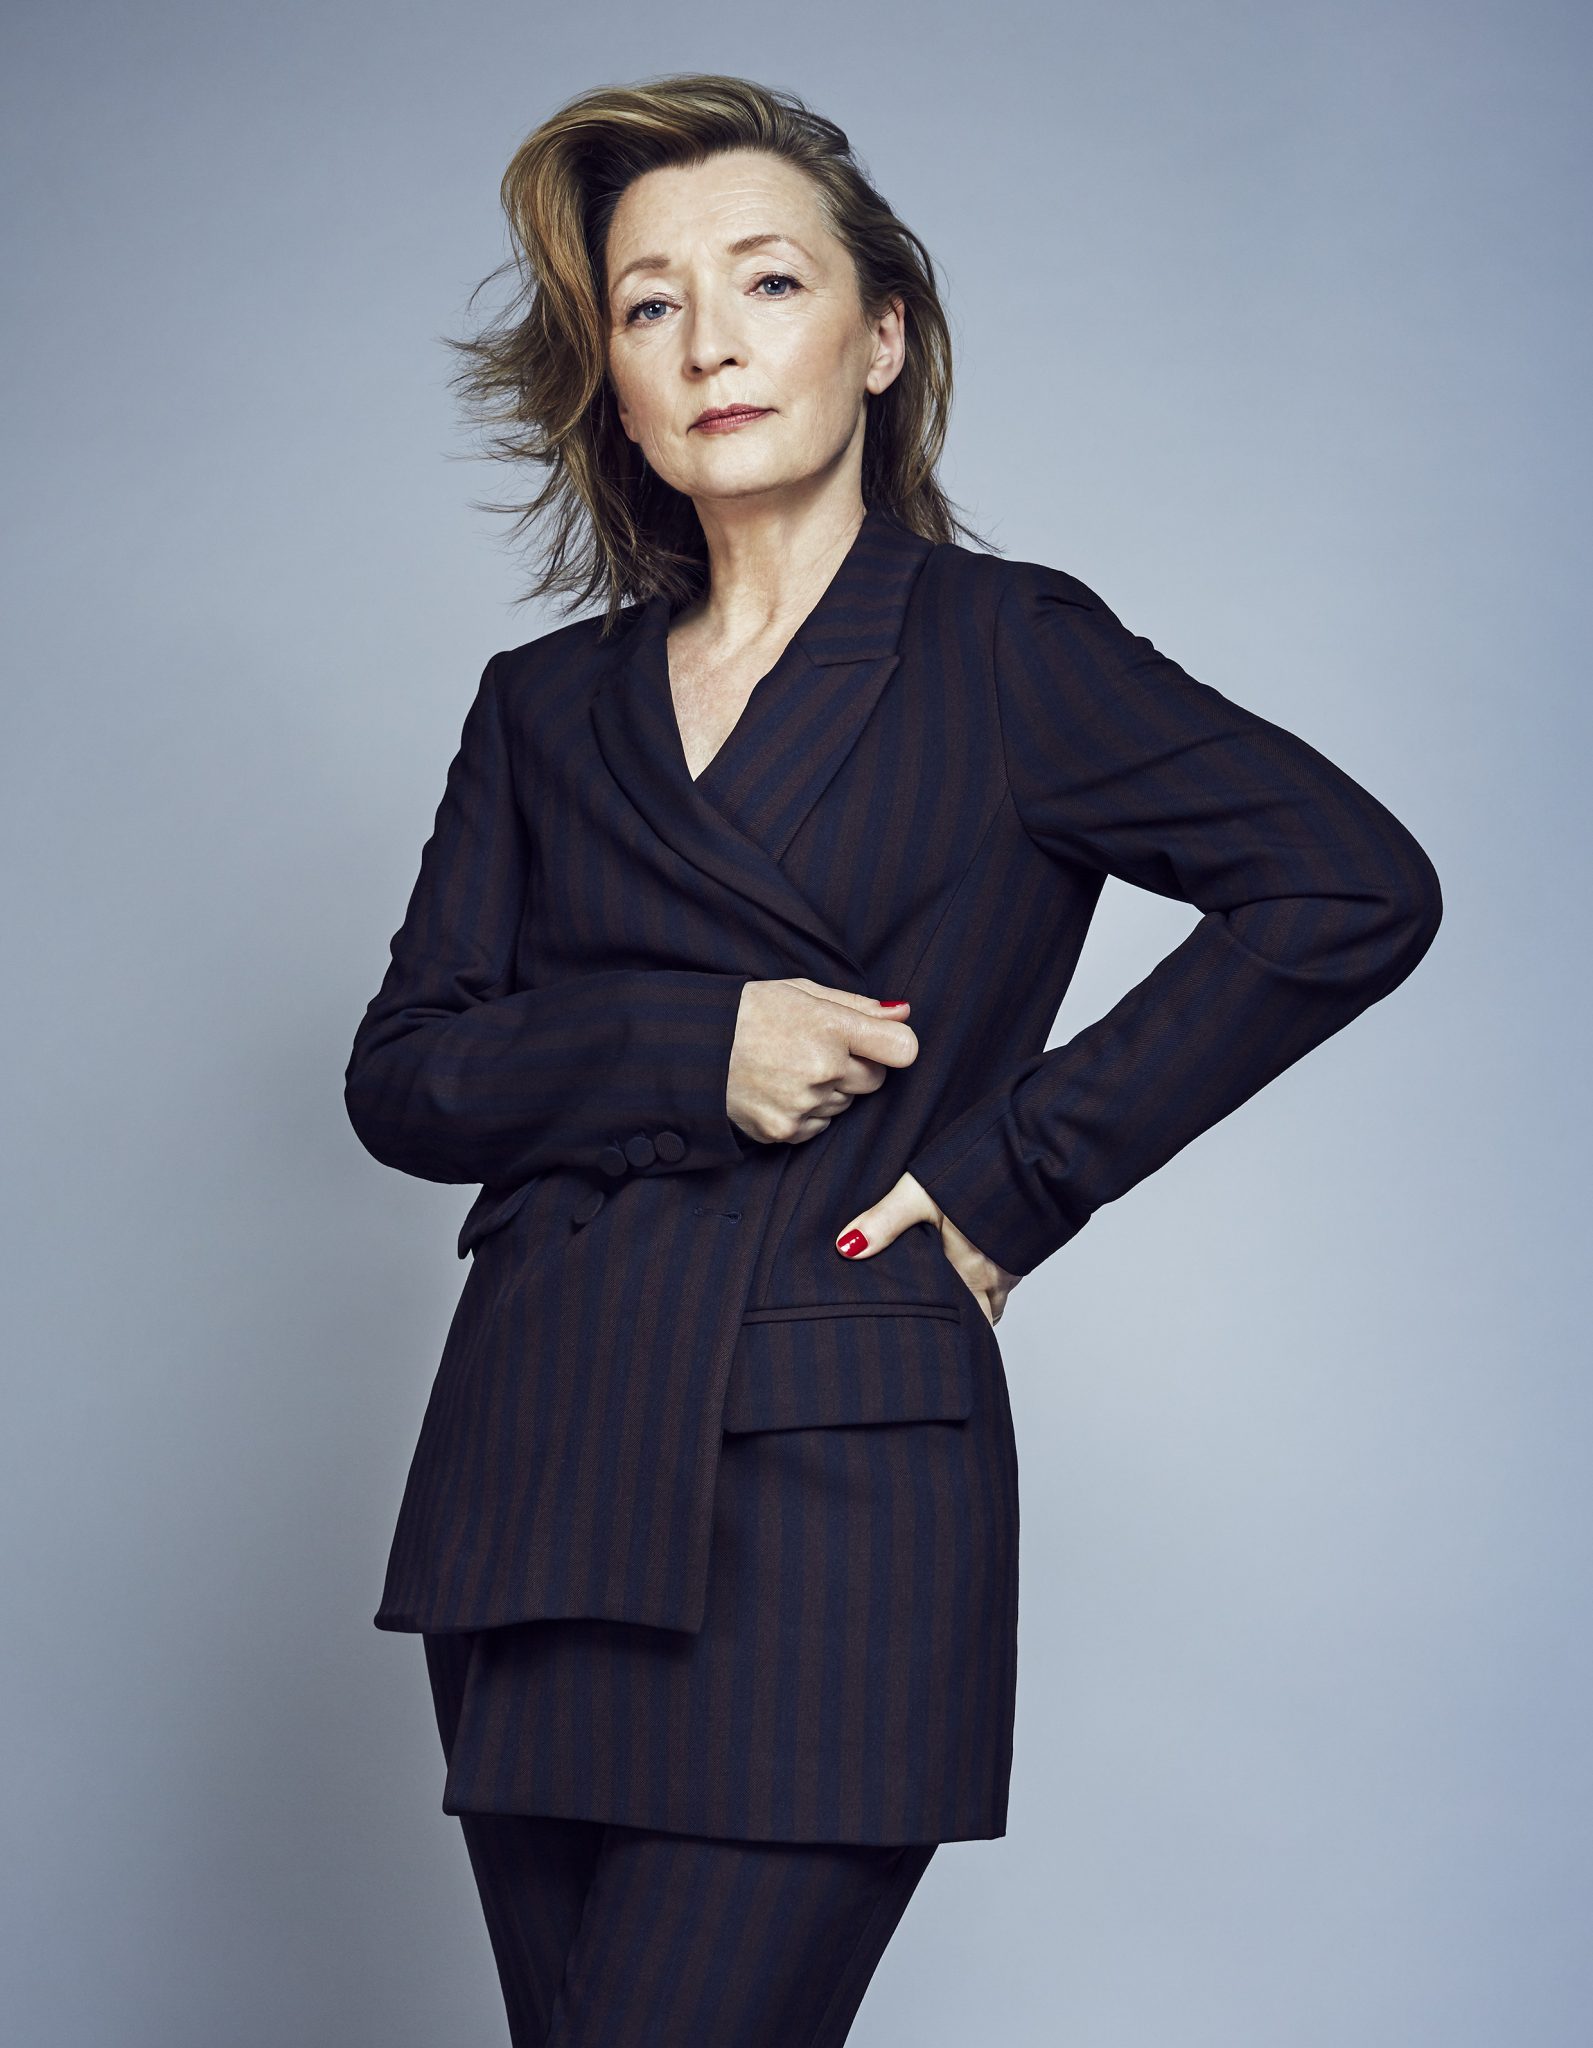  Lesley Manville (Photography by Rachell Smith)